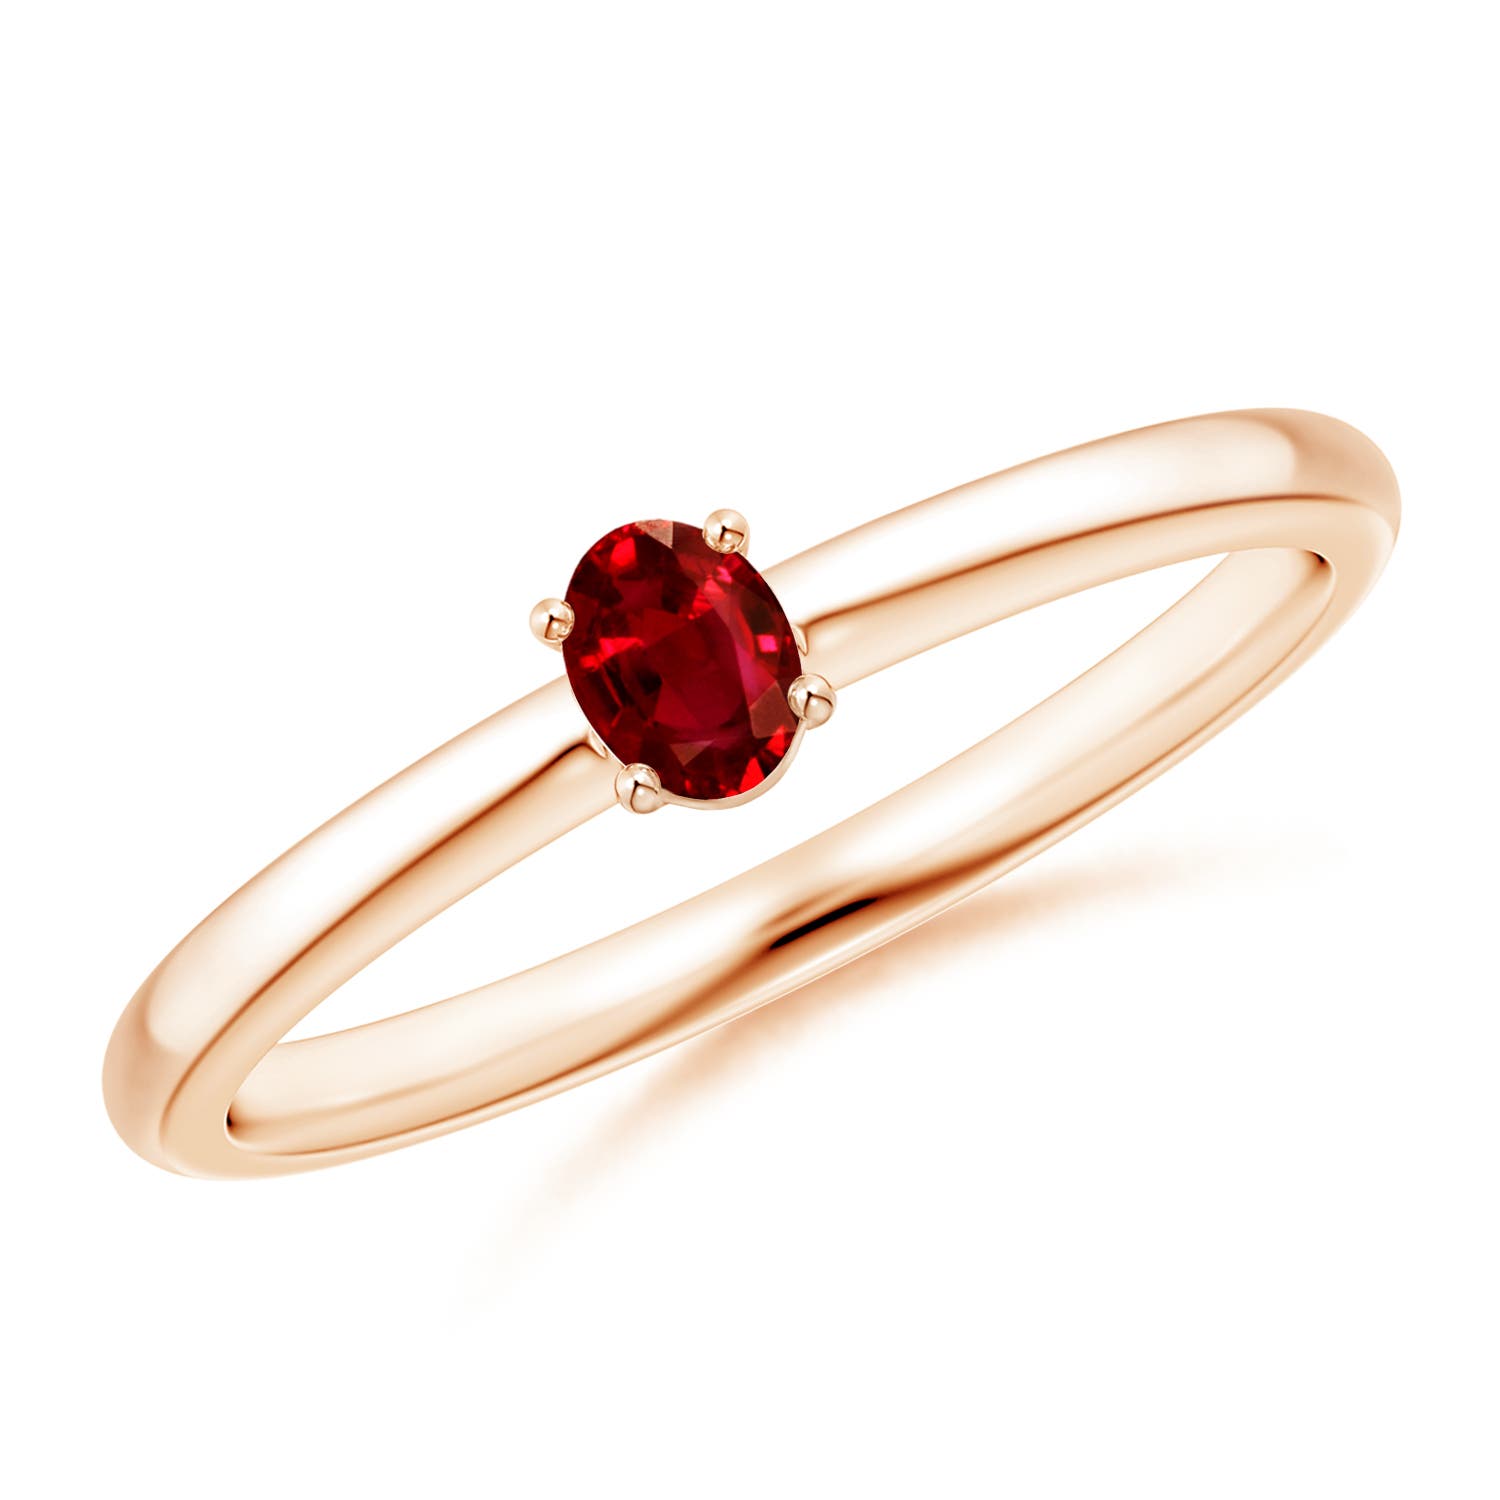 AAAA - Ruby / 0.2 CT / 14 KT Rose Gold